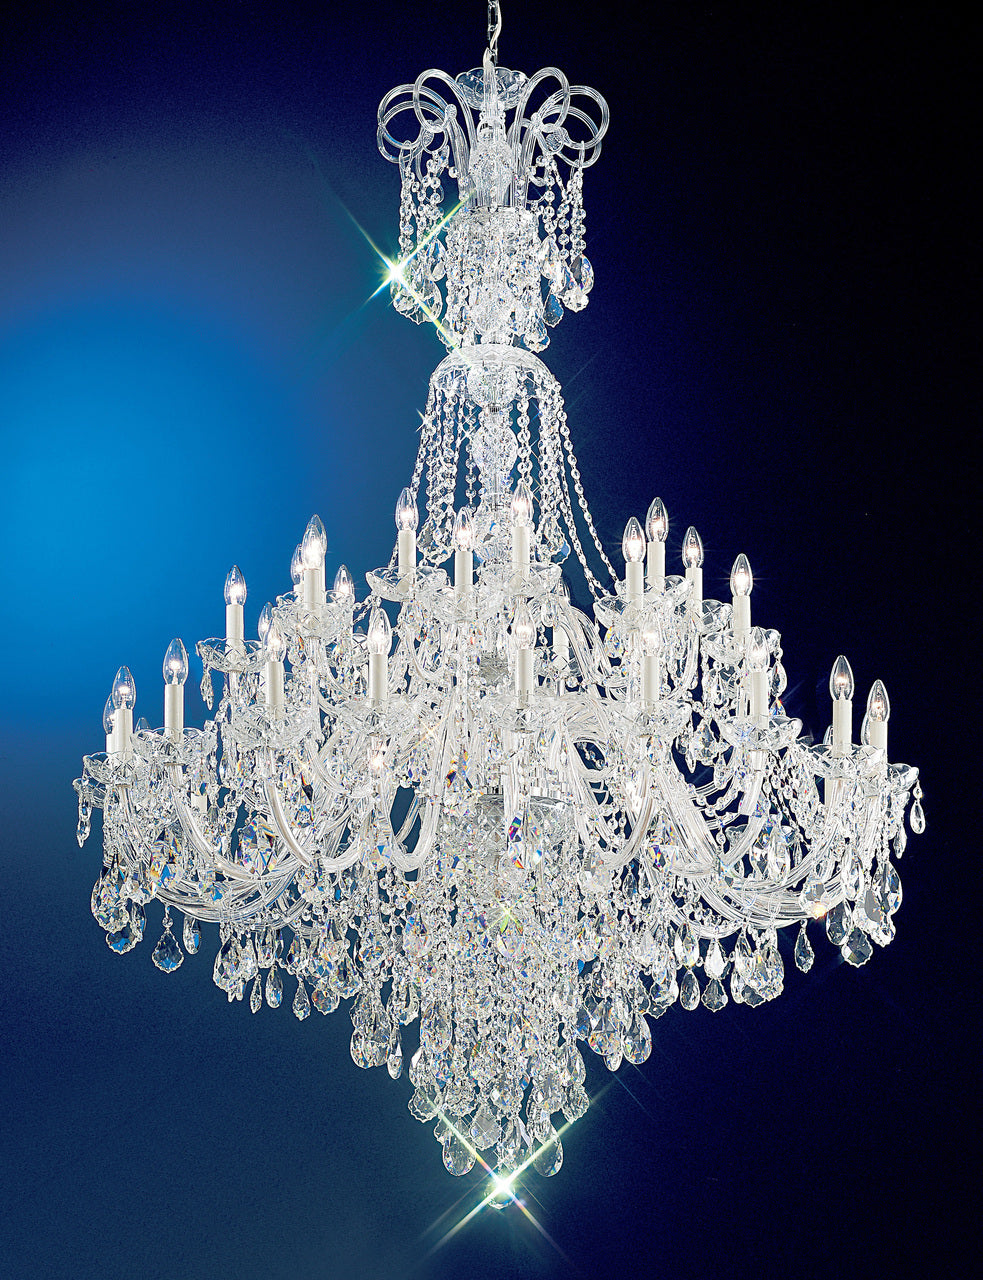 Classic Lighting 8266 G S Bohemia Crystal/Glass Chandelier in 24k Gold (Imported from Italy)